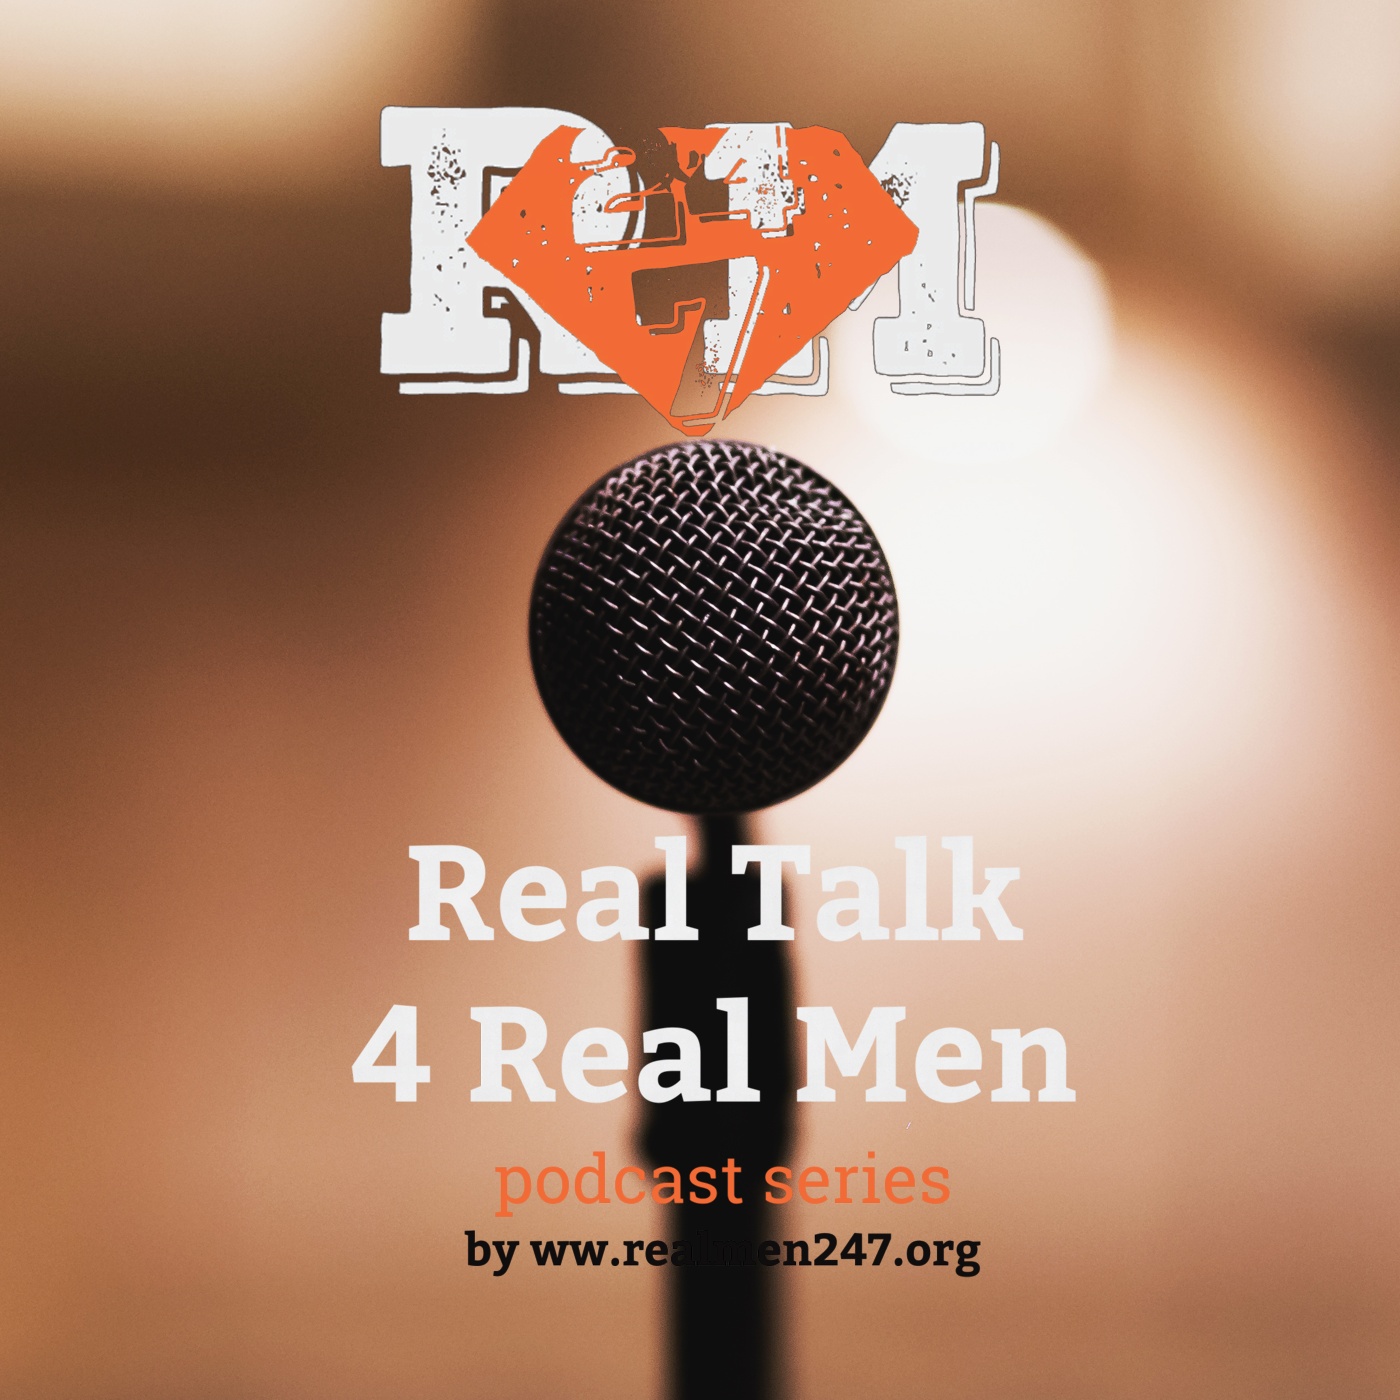 Real Talk 4 Real Men episode #1 - Topic: why bother?